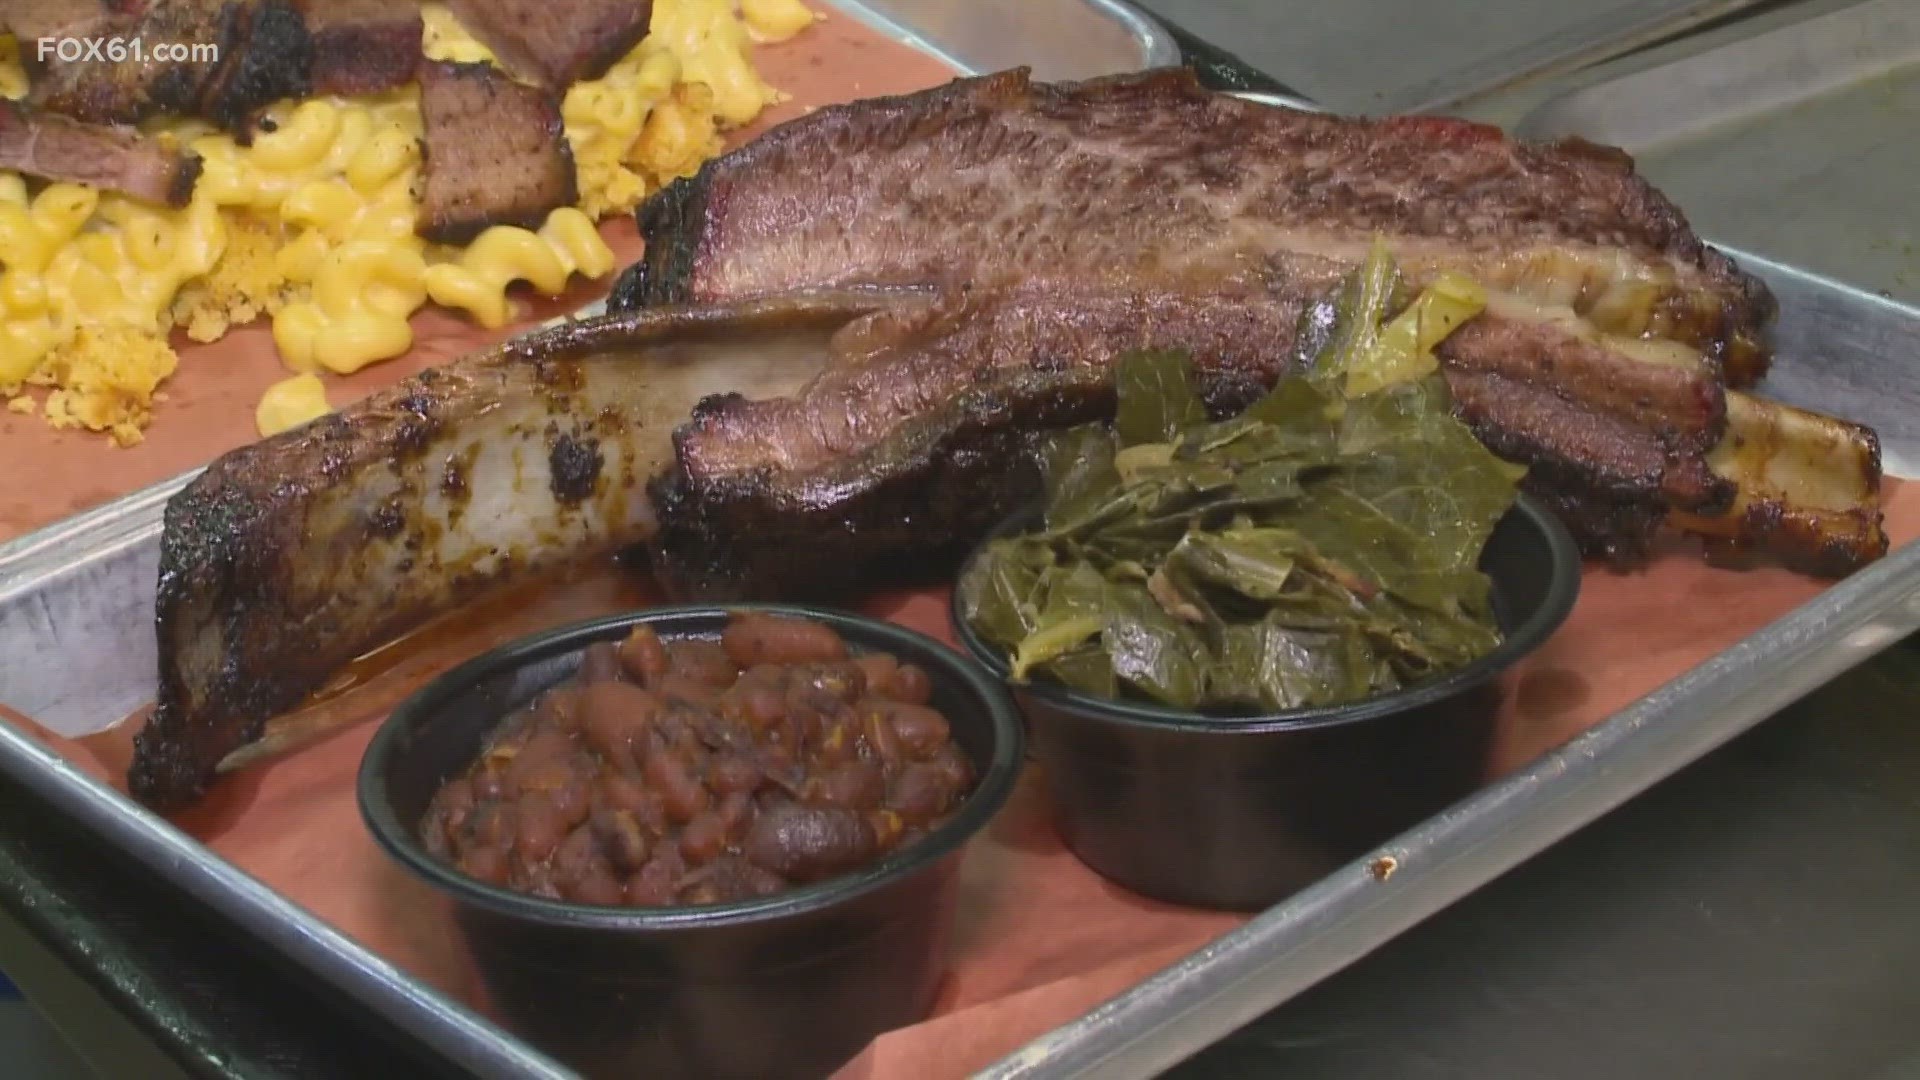 Bear's Smokehouse BBQ will celebrate its 10th anniversary at its New Haven location on June 3 from noon to 11 p.m.